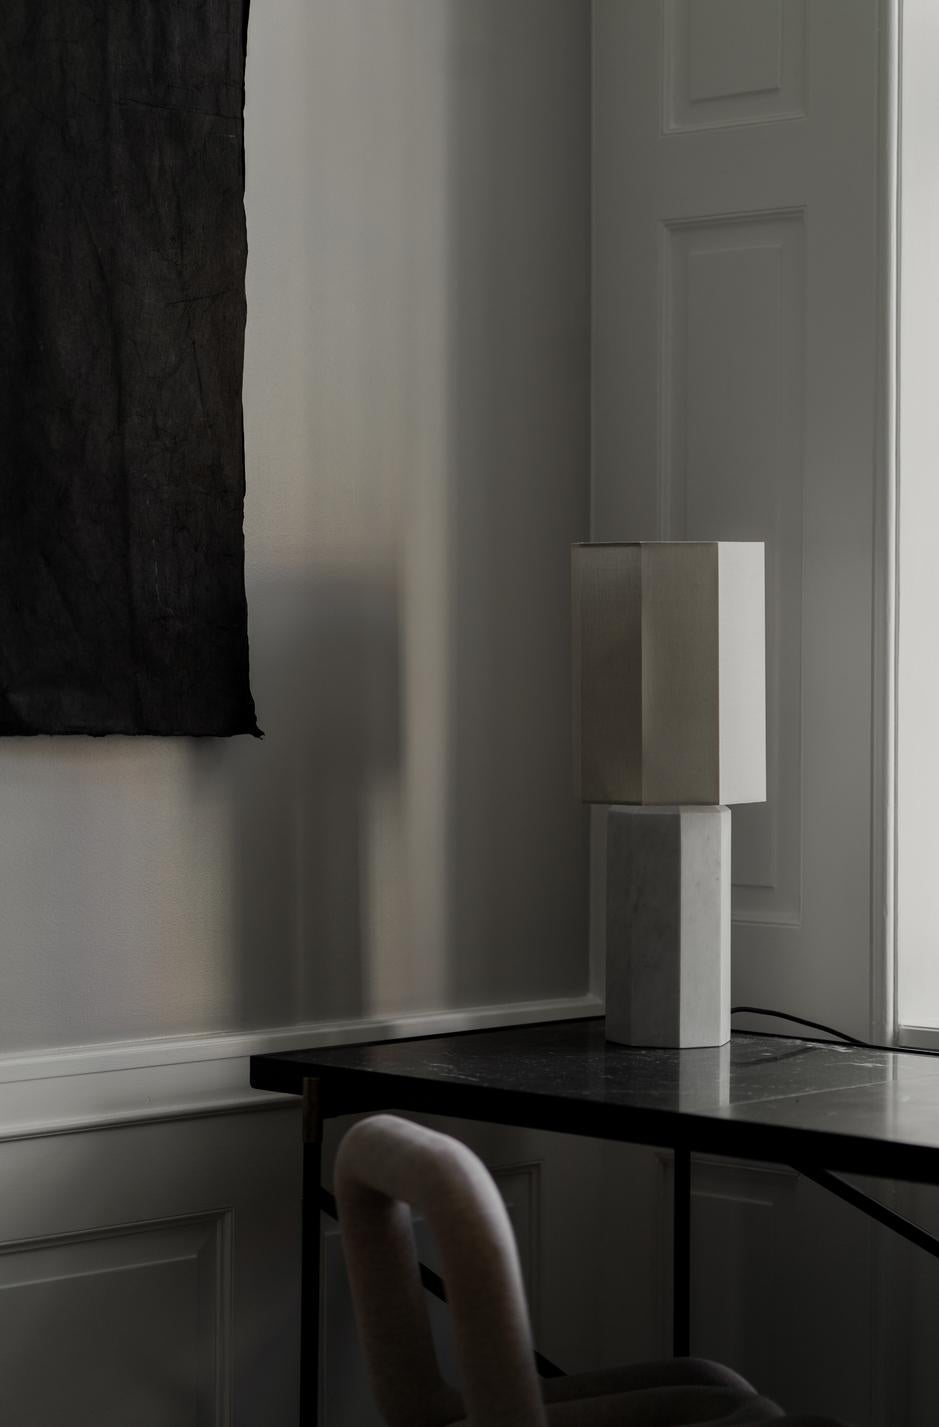 Table Lamp 'The Eight over Eight' by Louise Roe 

Designed in Denmark and manufactured in Italy.

Model shown in the picture: 
Base: White marble
Lampshade: Ocher 

Dimensions : 
Height: 36 cm
Diameter: 12.5 cm

Louise Roe is a